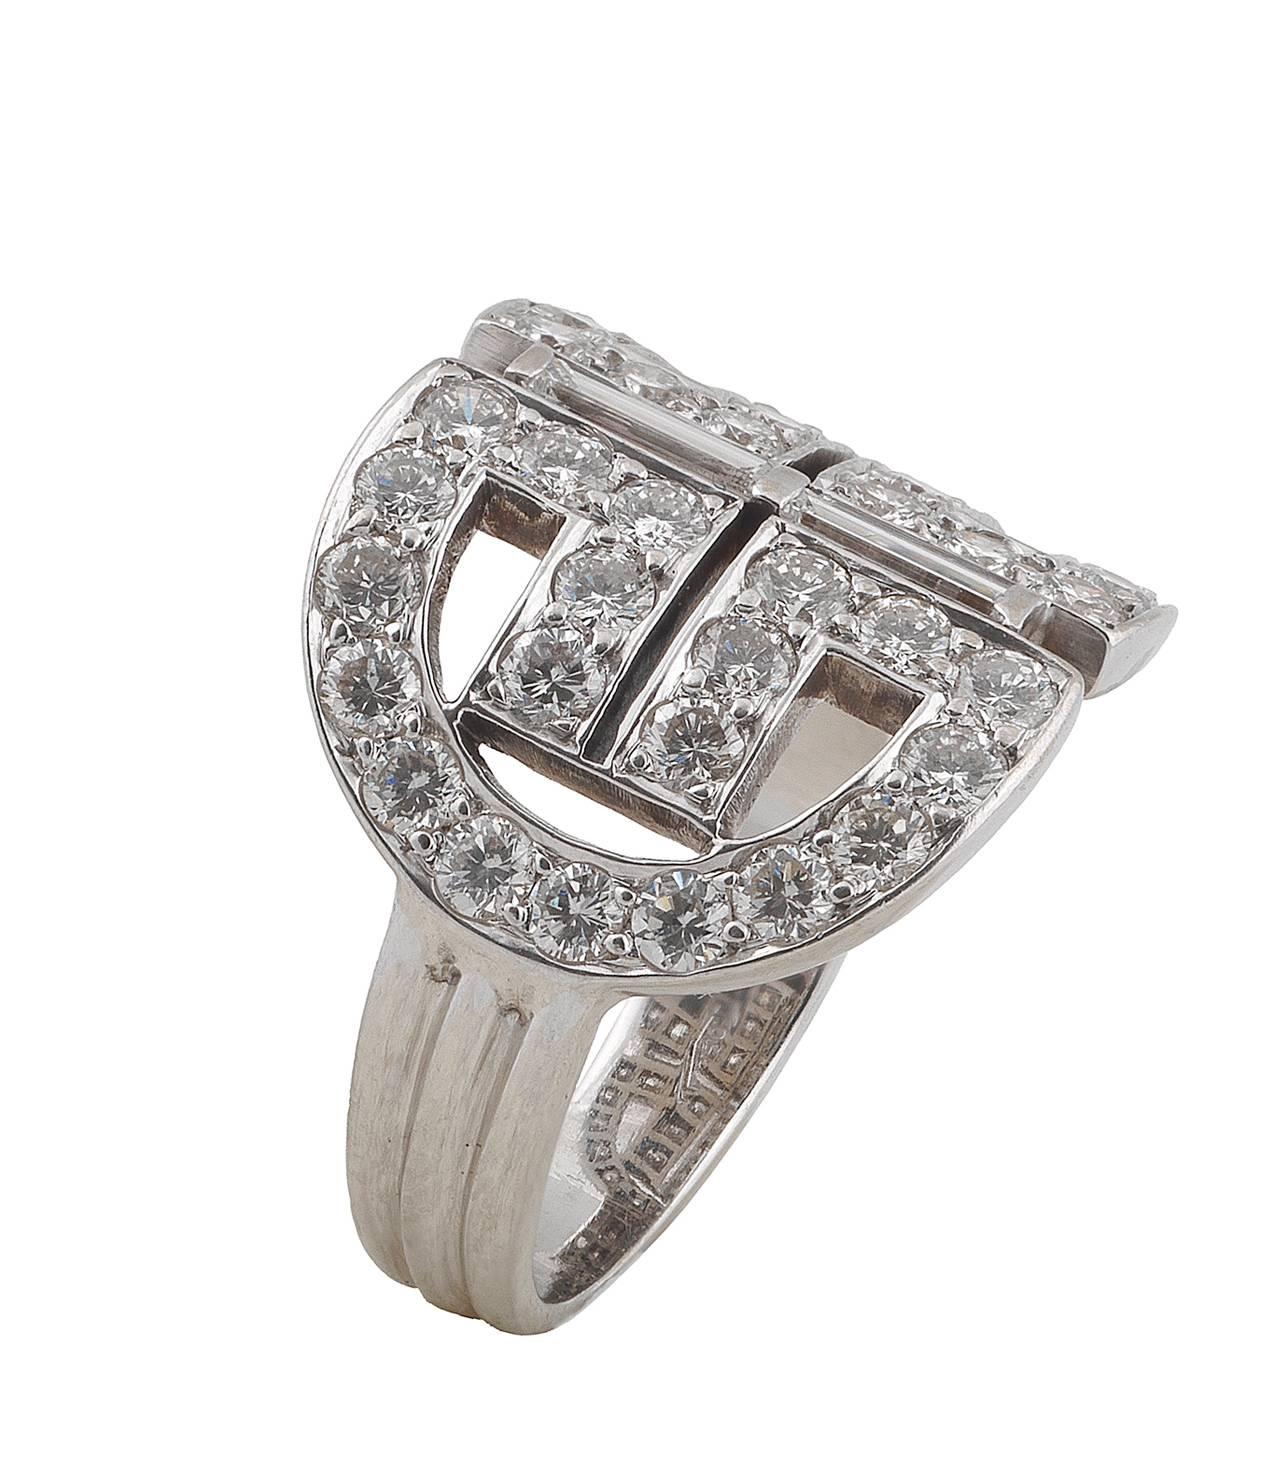 Designed with a geometric pattern, claw set brilliant cut diamonds weighing approximately 2 cts, two collet set baguette cut diamond weighing approximately 0.60 cts

Mounted in 18Kt white gold.

Finger size: 8

Weight: 9.4 gr
